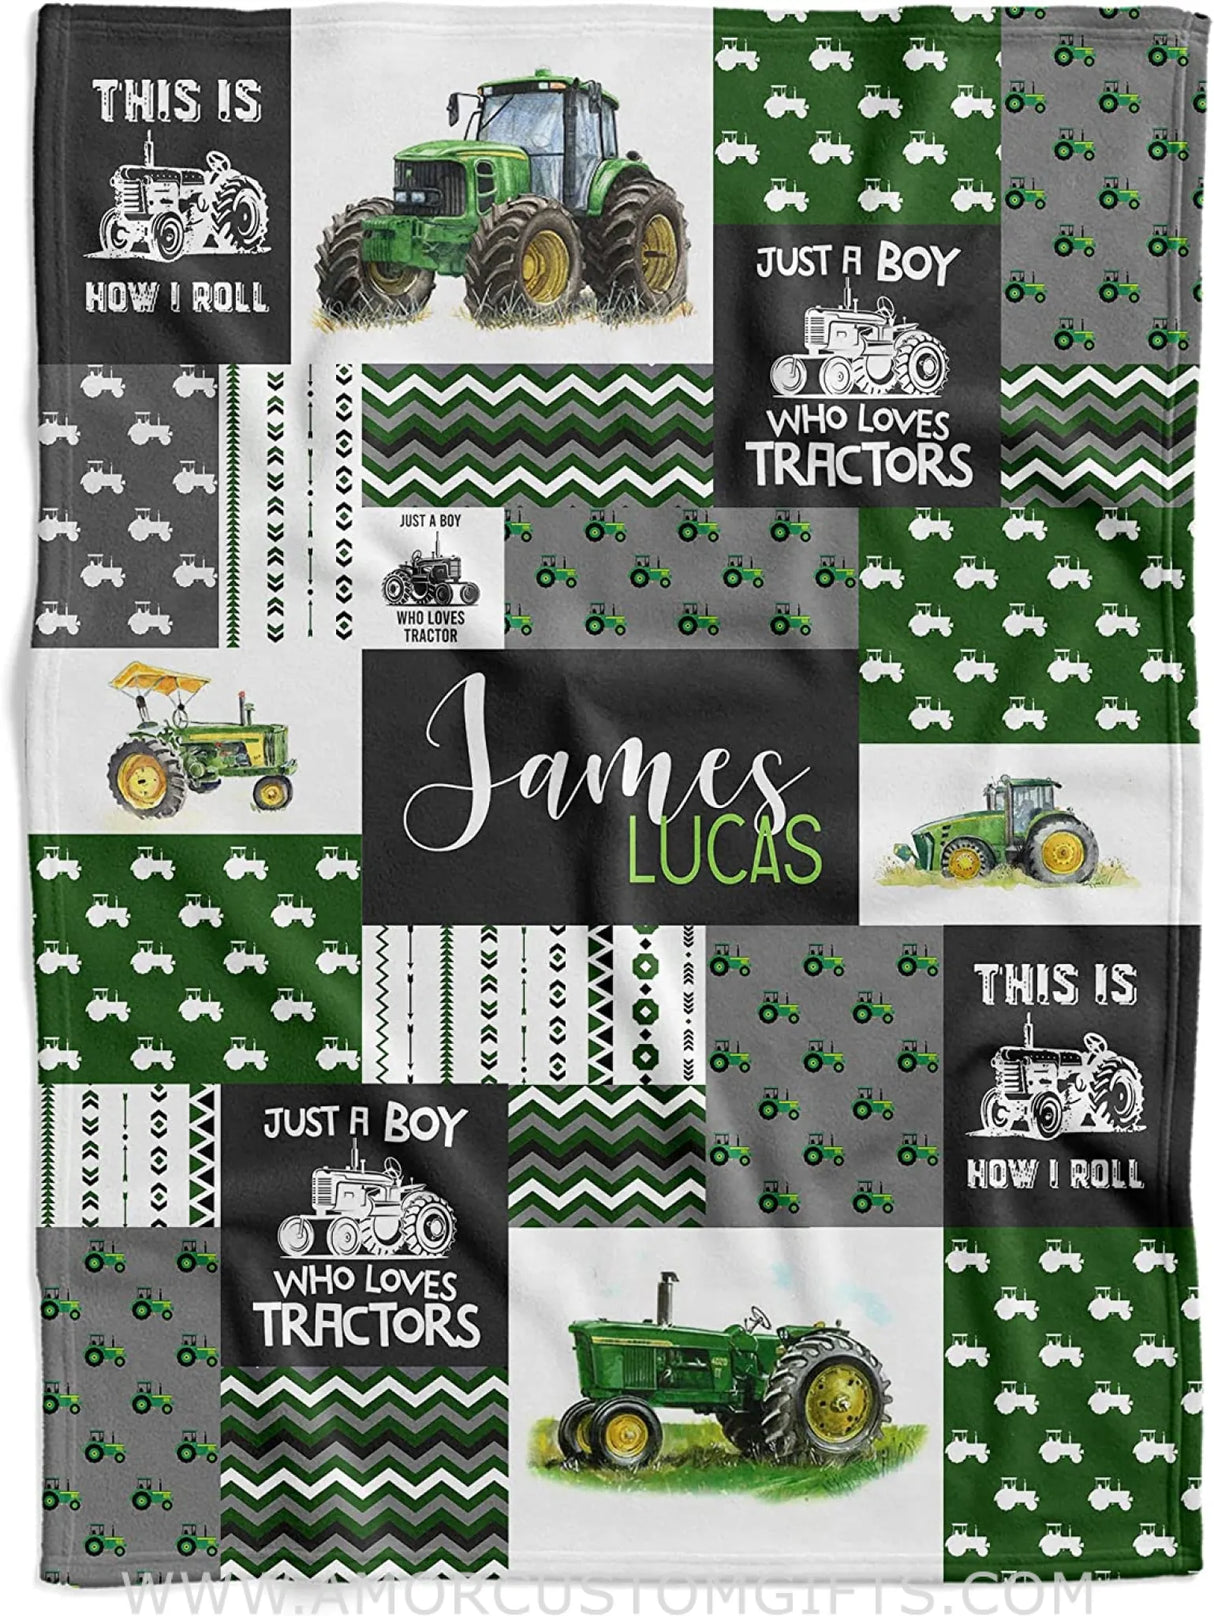 Blankets USA MADE Tractor Personalized Baby Blankets for Boys - Custom Baby Blankets with Name